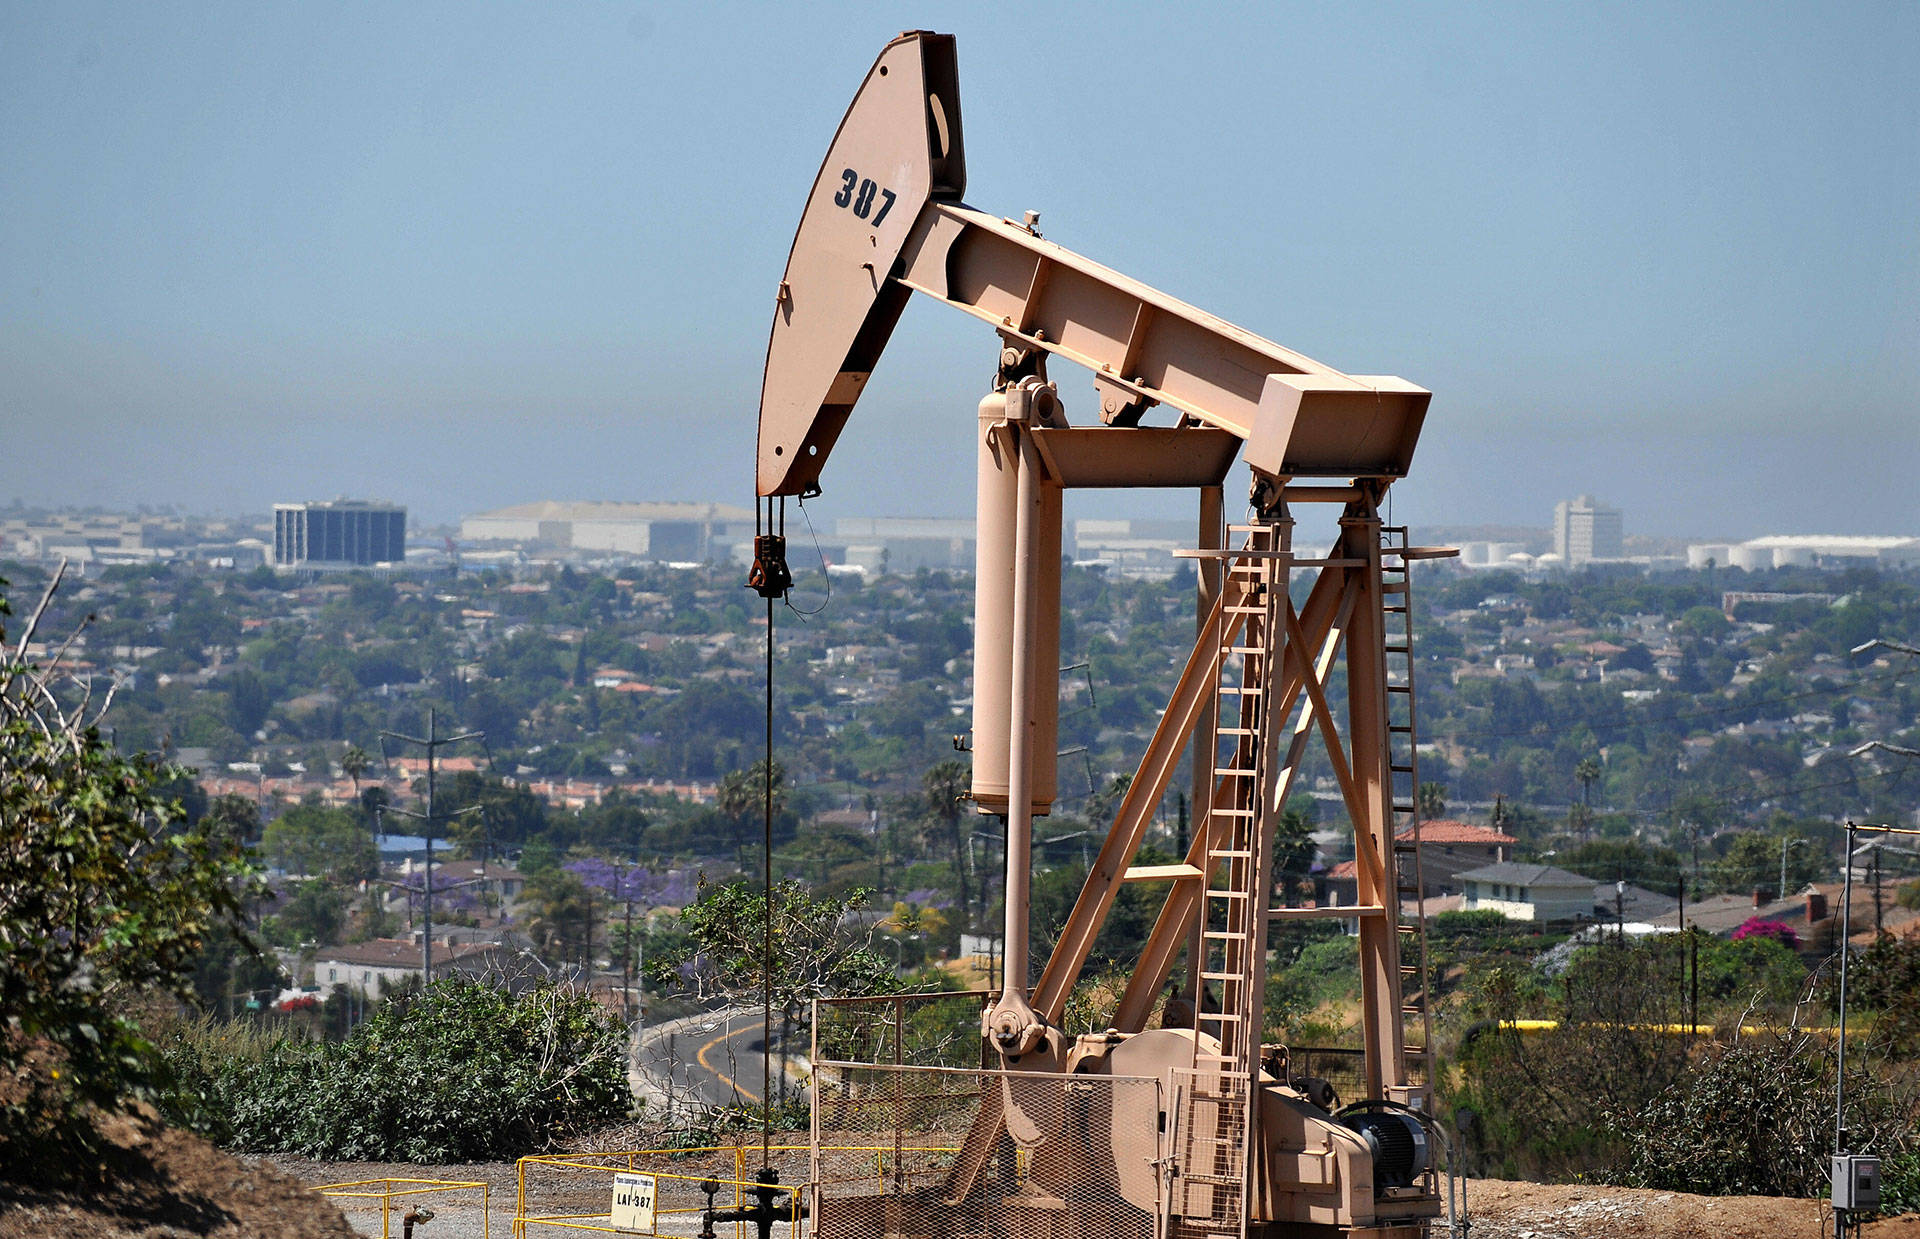 An oil rig operates in Culver City. GABRIEL BOUYS/AFP/Getty Images